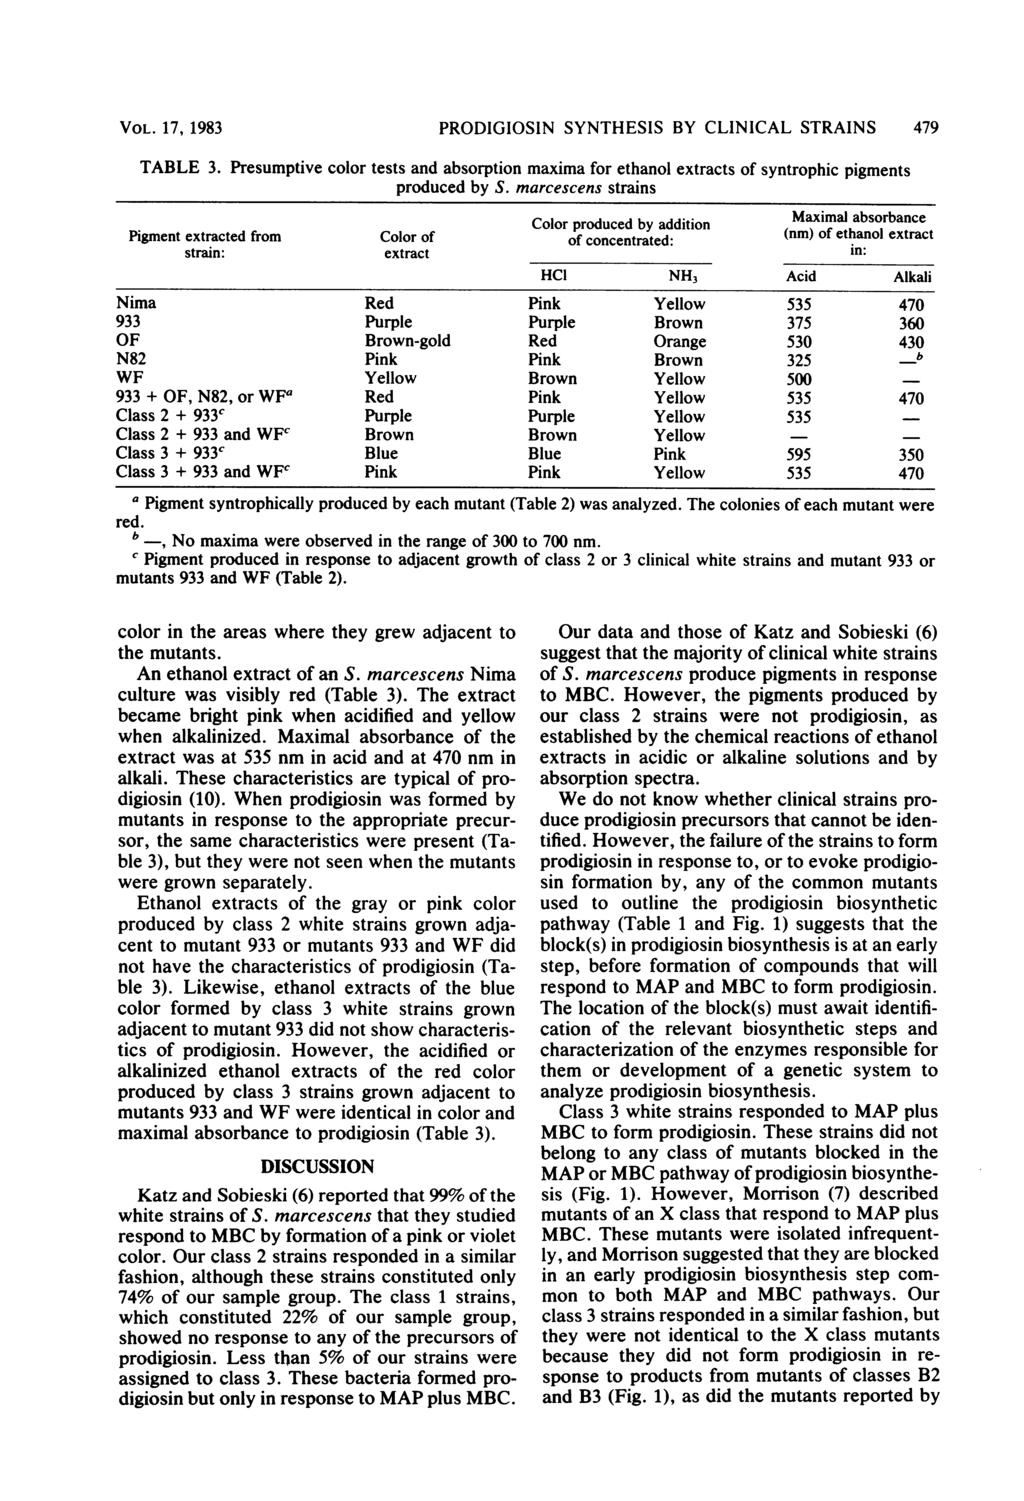 VOL. 17, 1983 TABLE 3. PRODIGIOSIN SYNTHESIS BY CLINICAL STRAINS 479 Presumptive color tests and absorption maxima for ethanol extracts of syntrophic pigments produced by S.